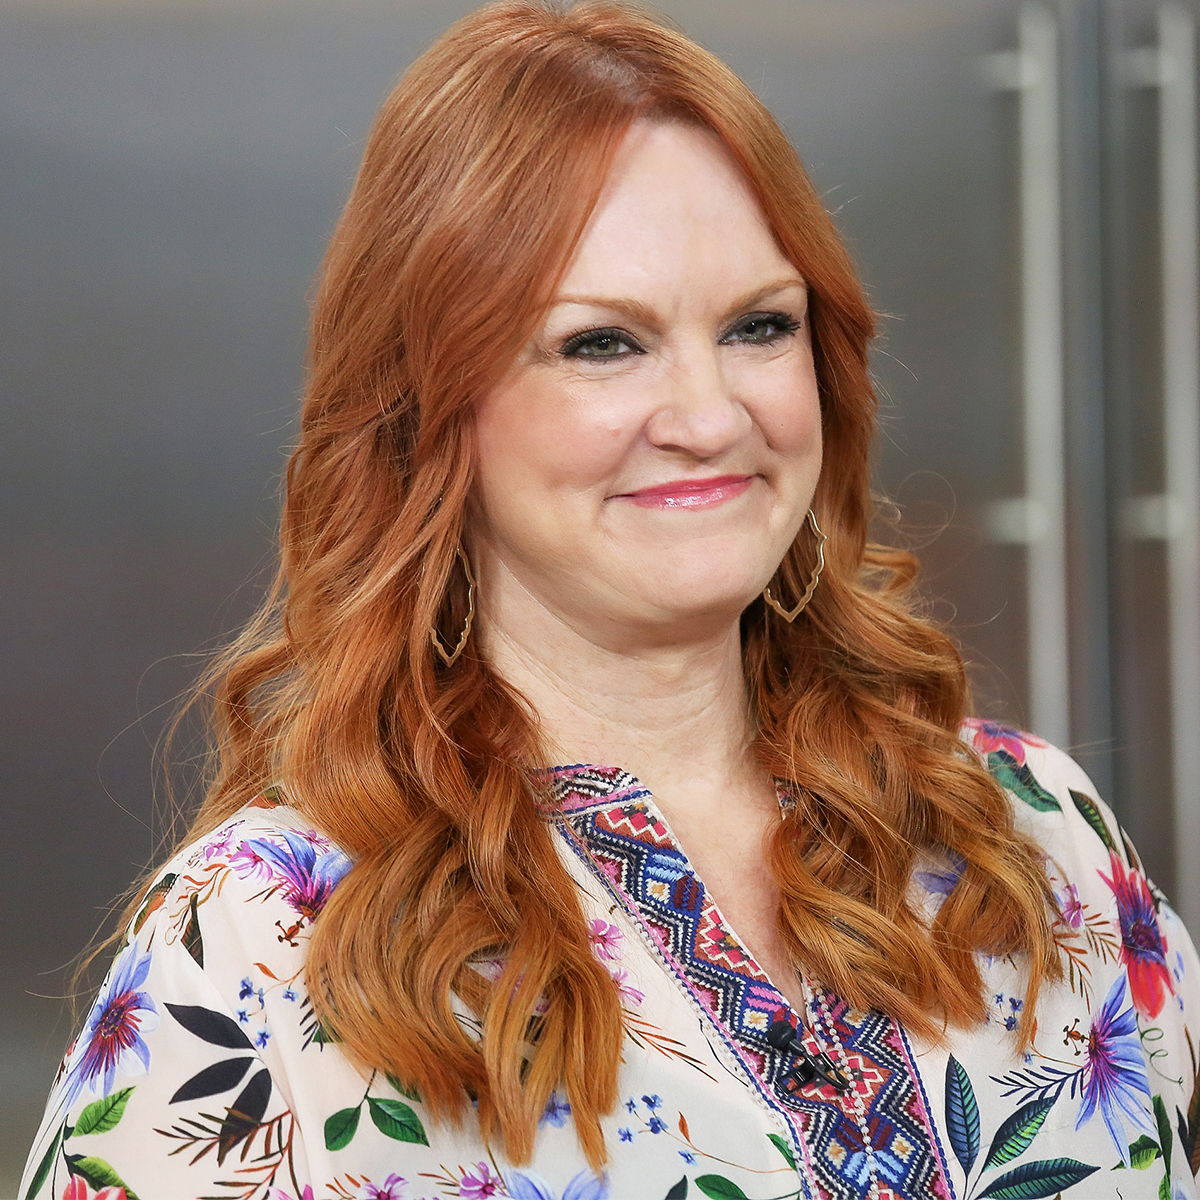 Ree Drummond shares painful details about her husband’s injury after an accident